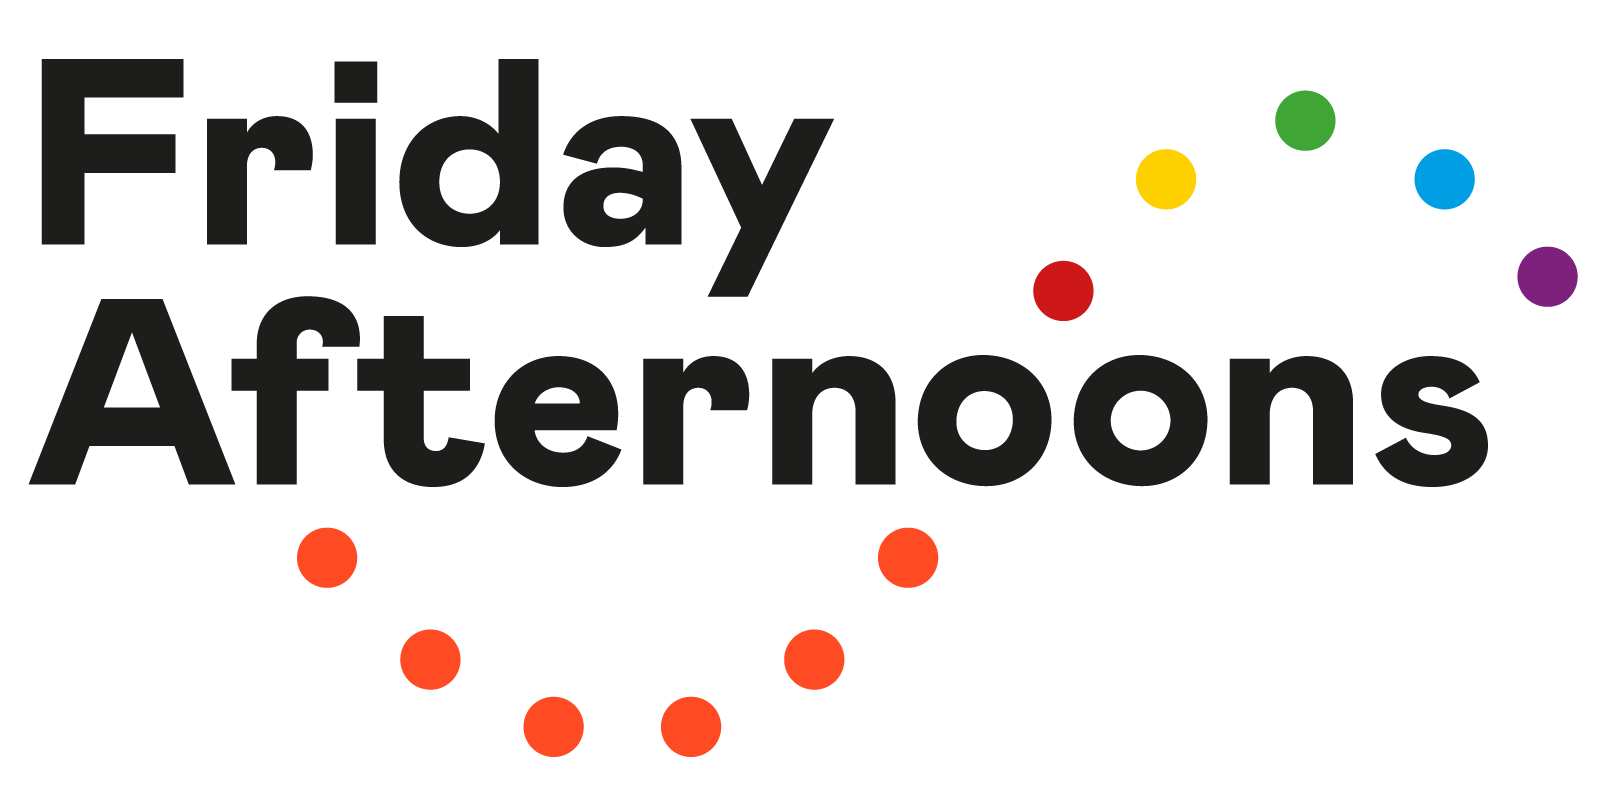 Friday Afternoons logo